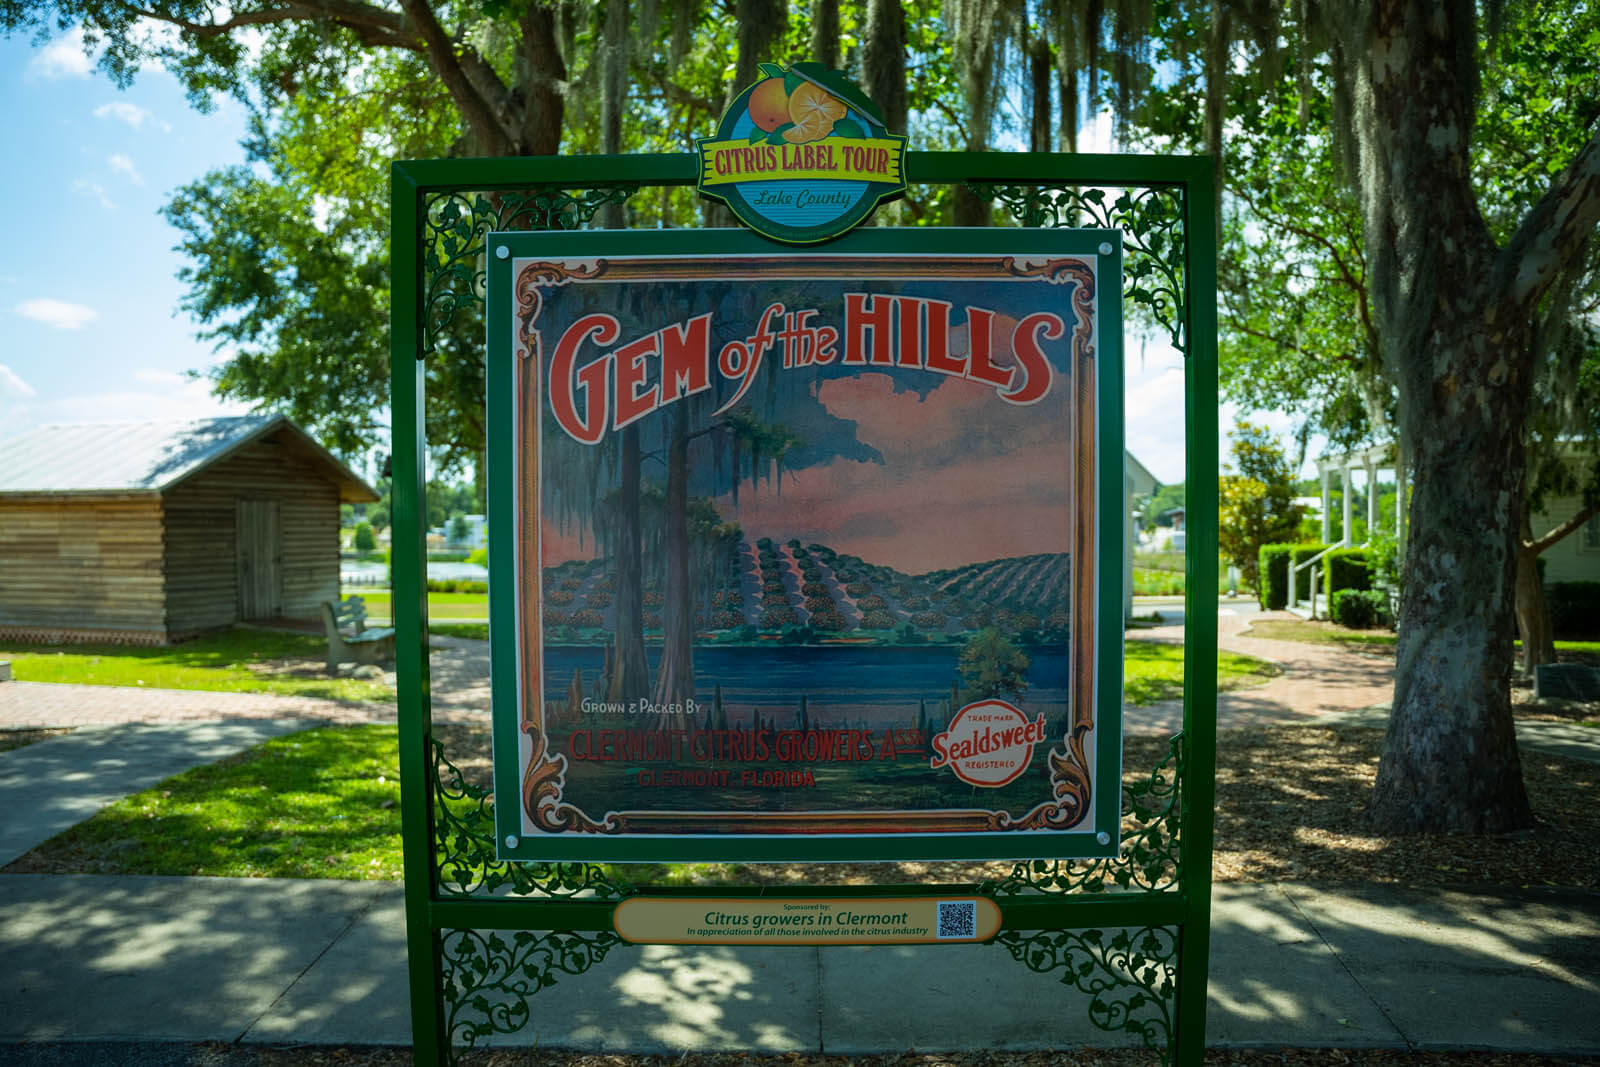 Gem of the Hills Citrus Label in Clermont in Lake County Florida